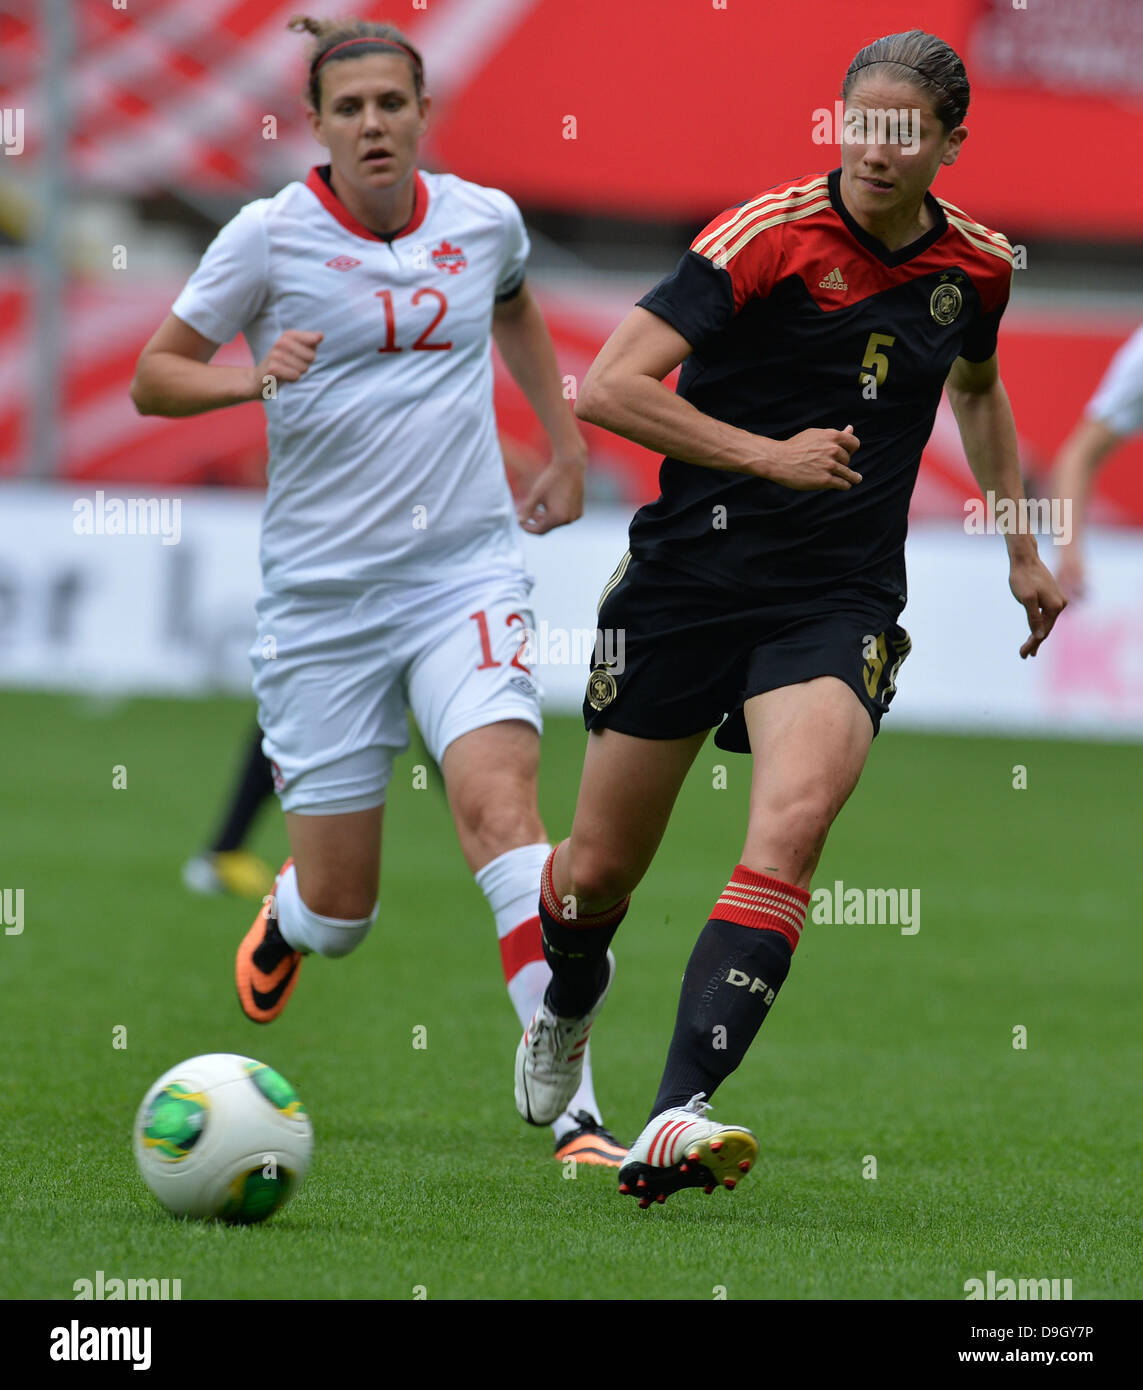 Germany's Annike Krahn (L) vies for the ball with Canada's Christine Sinclair in the women's soccer match Germany vs Canada at Benteler-Arena in Paderborn, Germany, 19 June 2013. Photo: CARMEN JASPERSEN Stock Photo